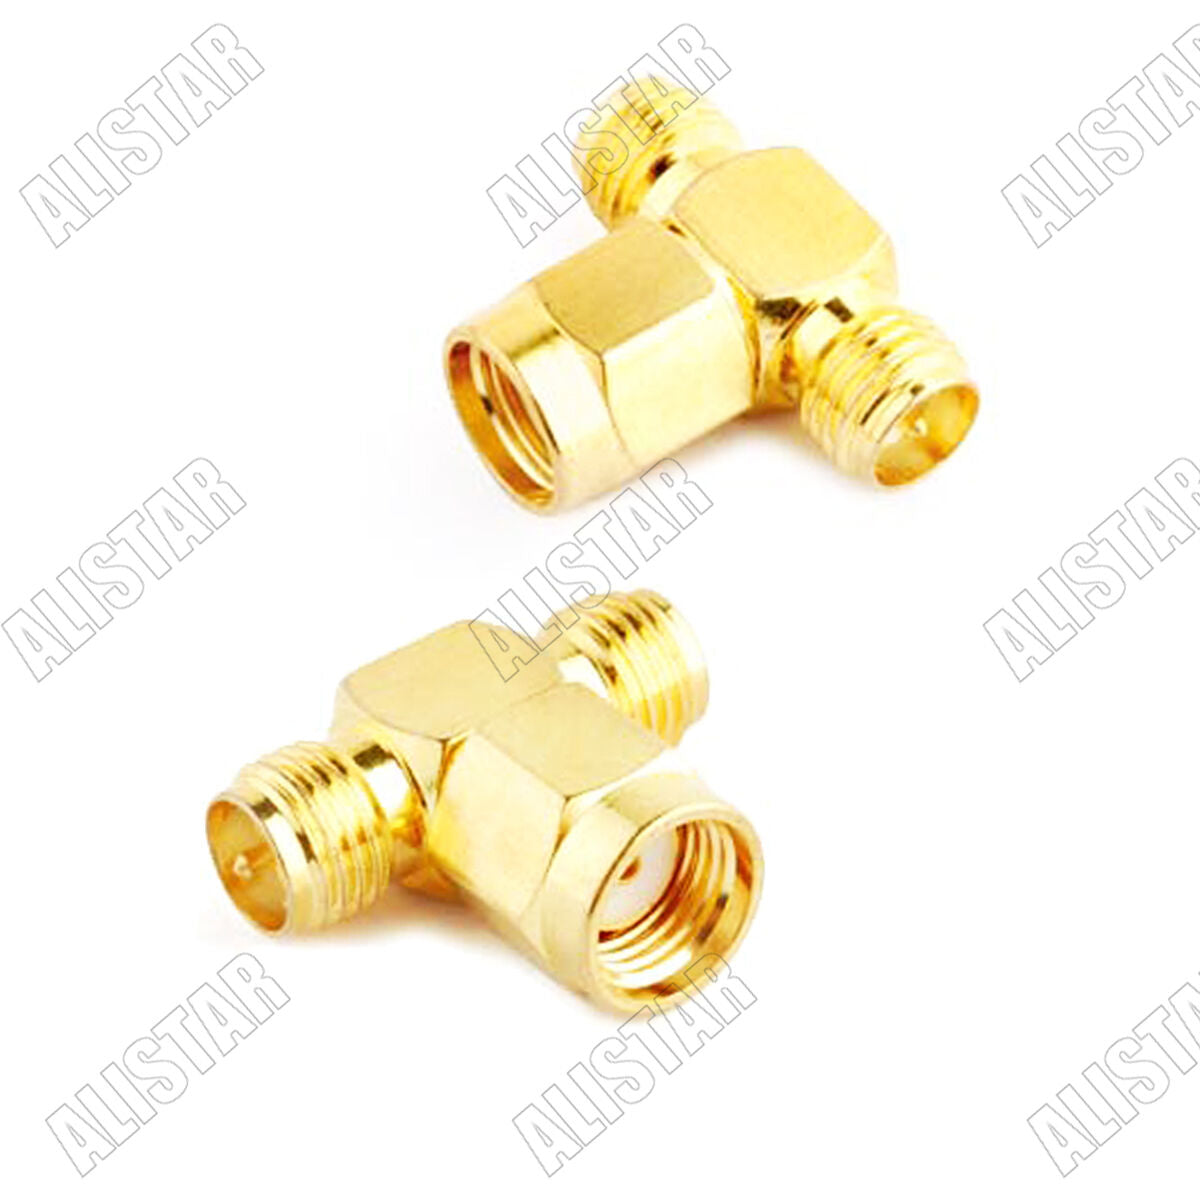 1 Piece of Adapter SMA Splitter / Joiner 3 WAY ADAPTER 2x RP SMA female to male